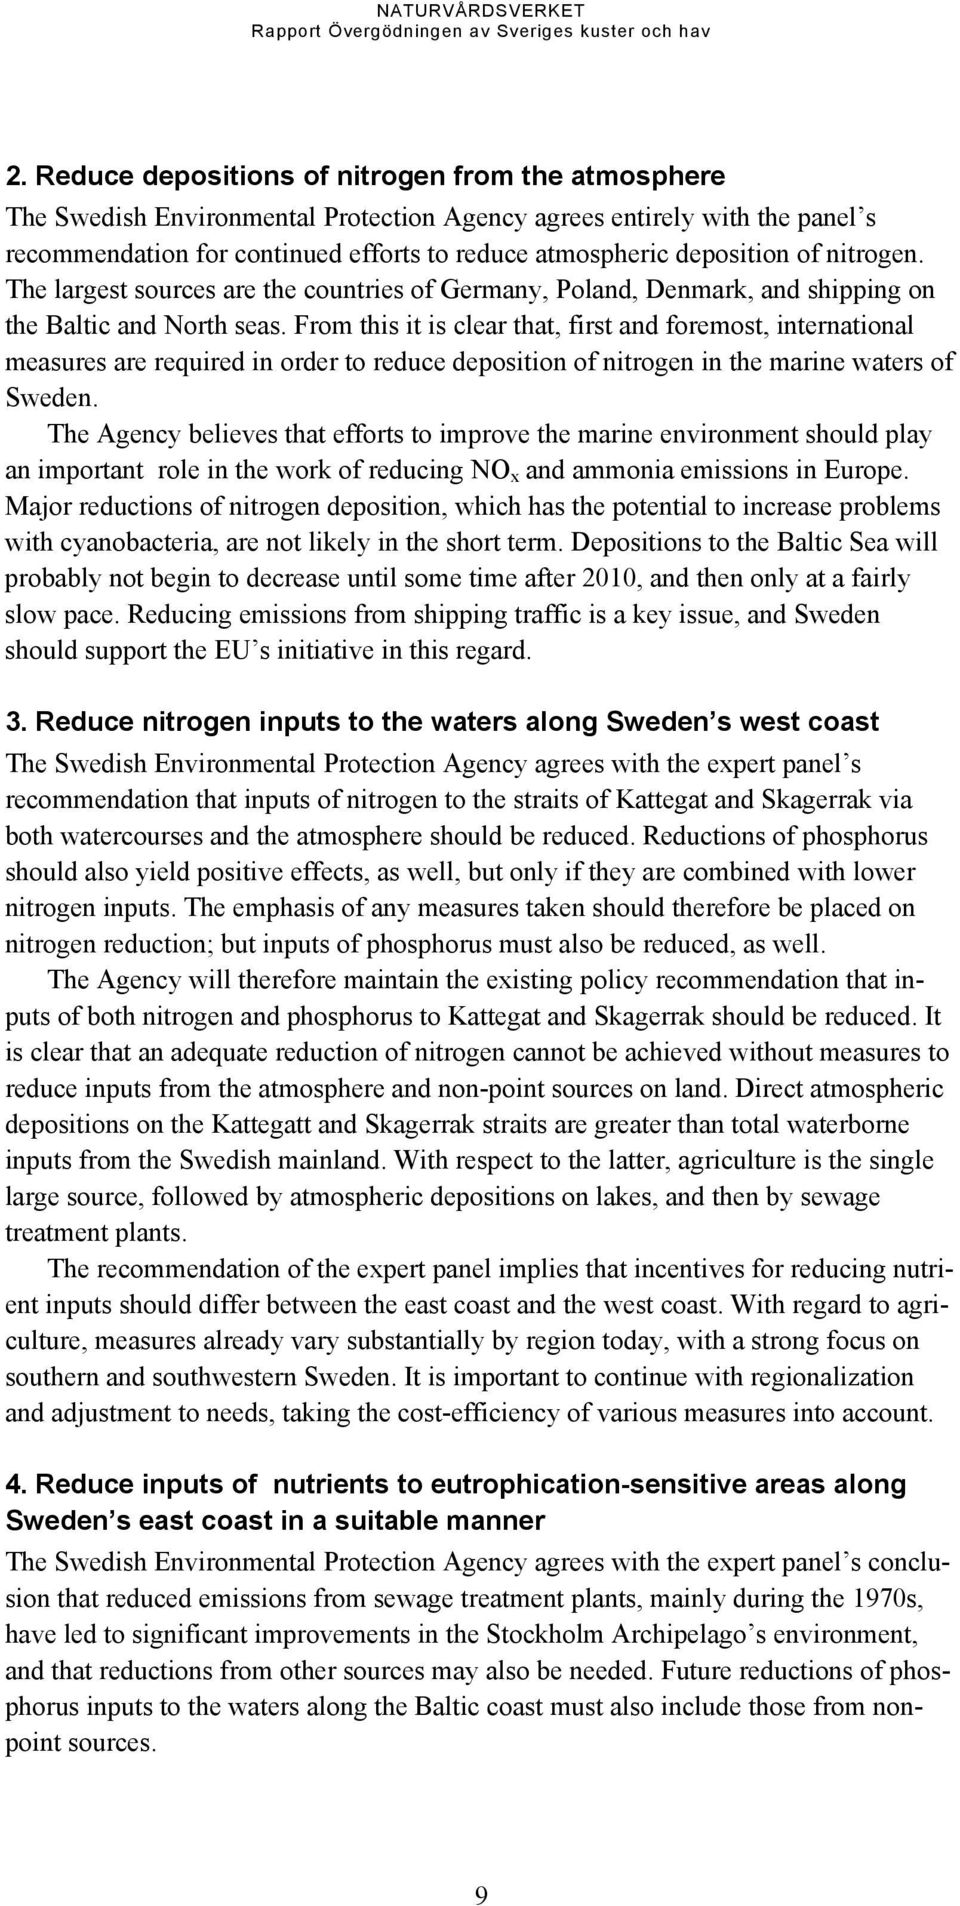 From this it is clear that, first and foremost, international measures are required in order to reduce deposition of nitrogen in the marine waters of Sweden.